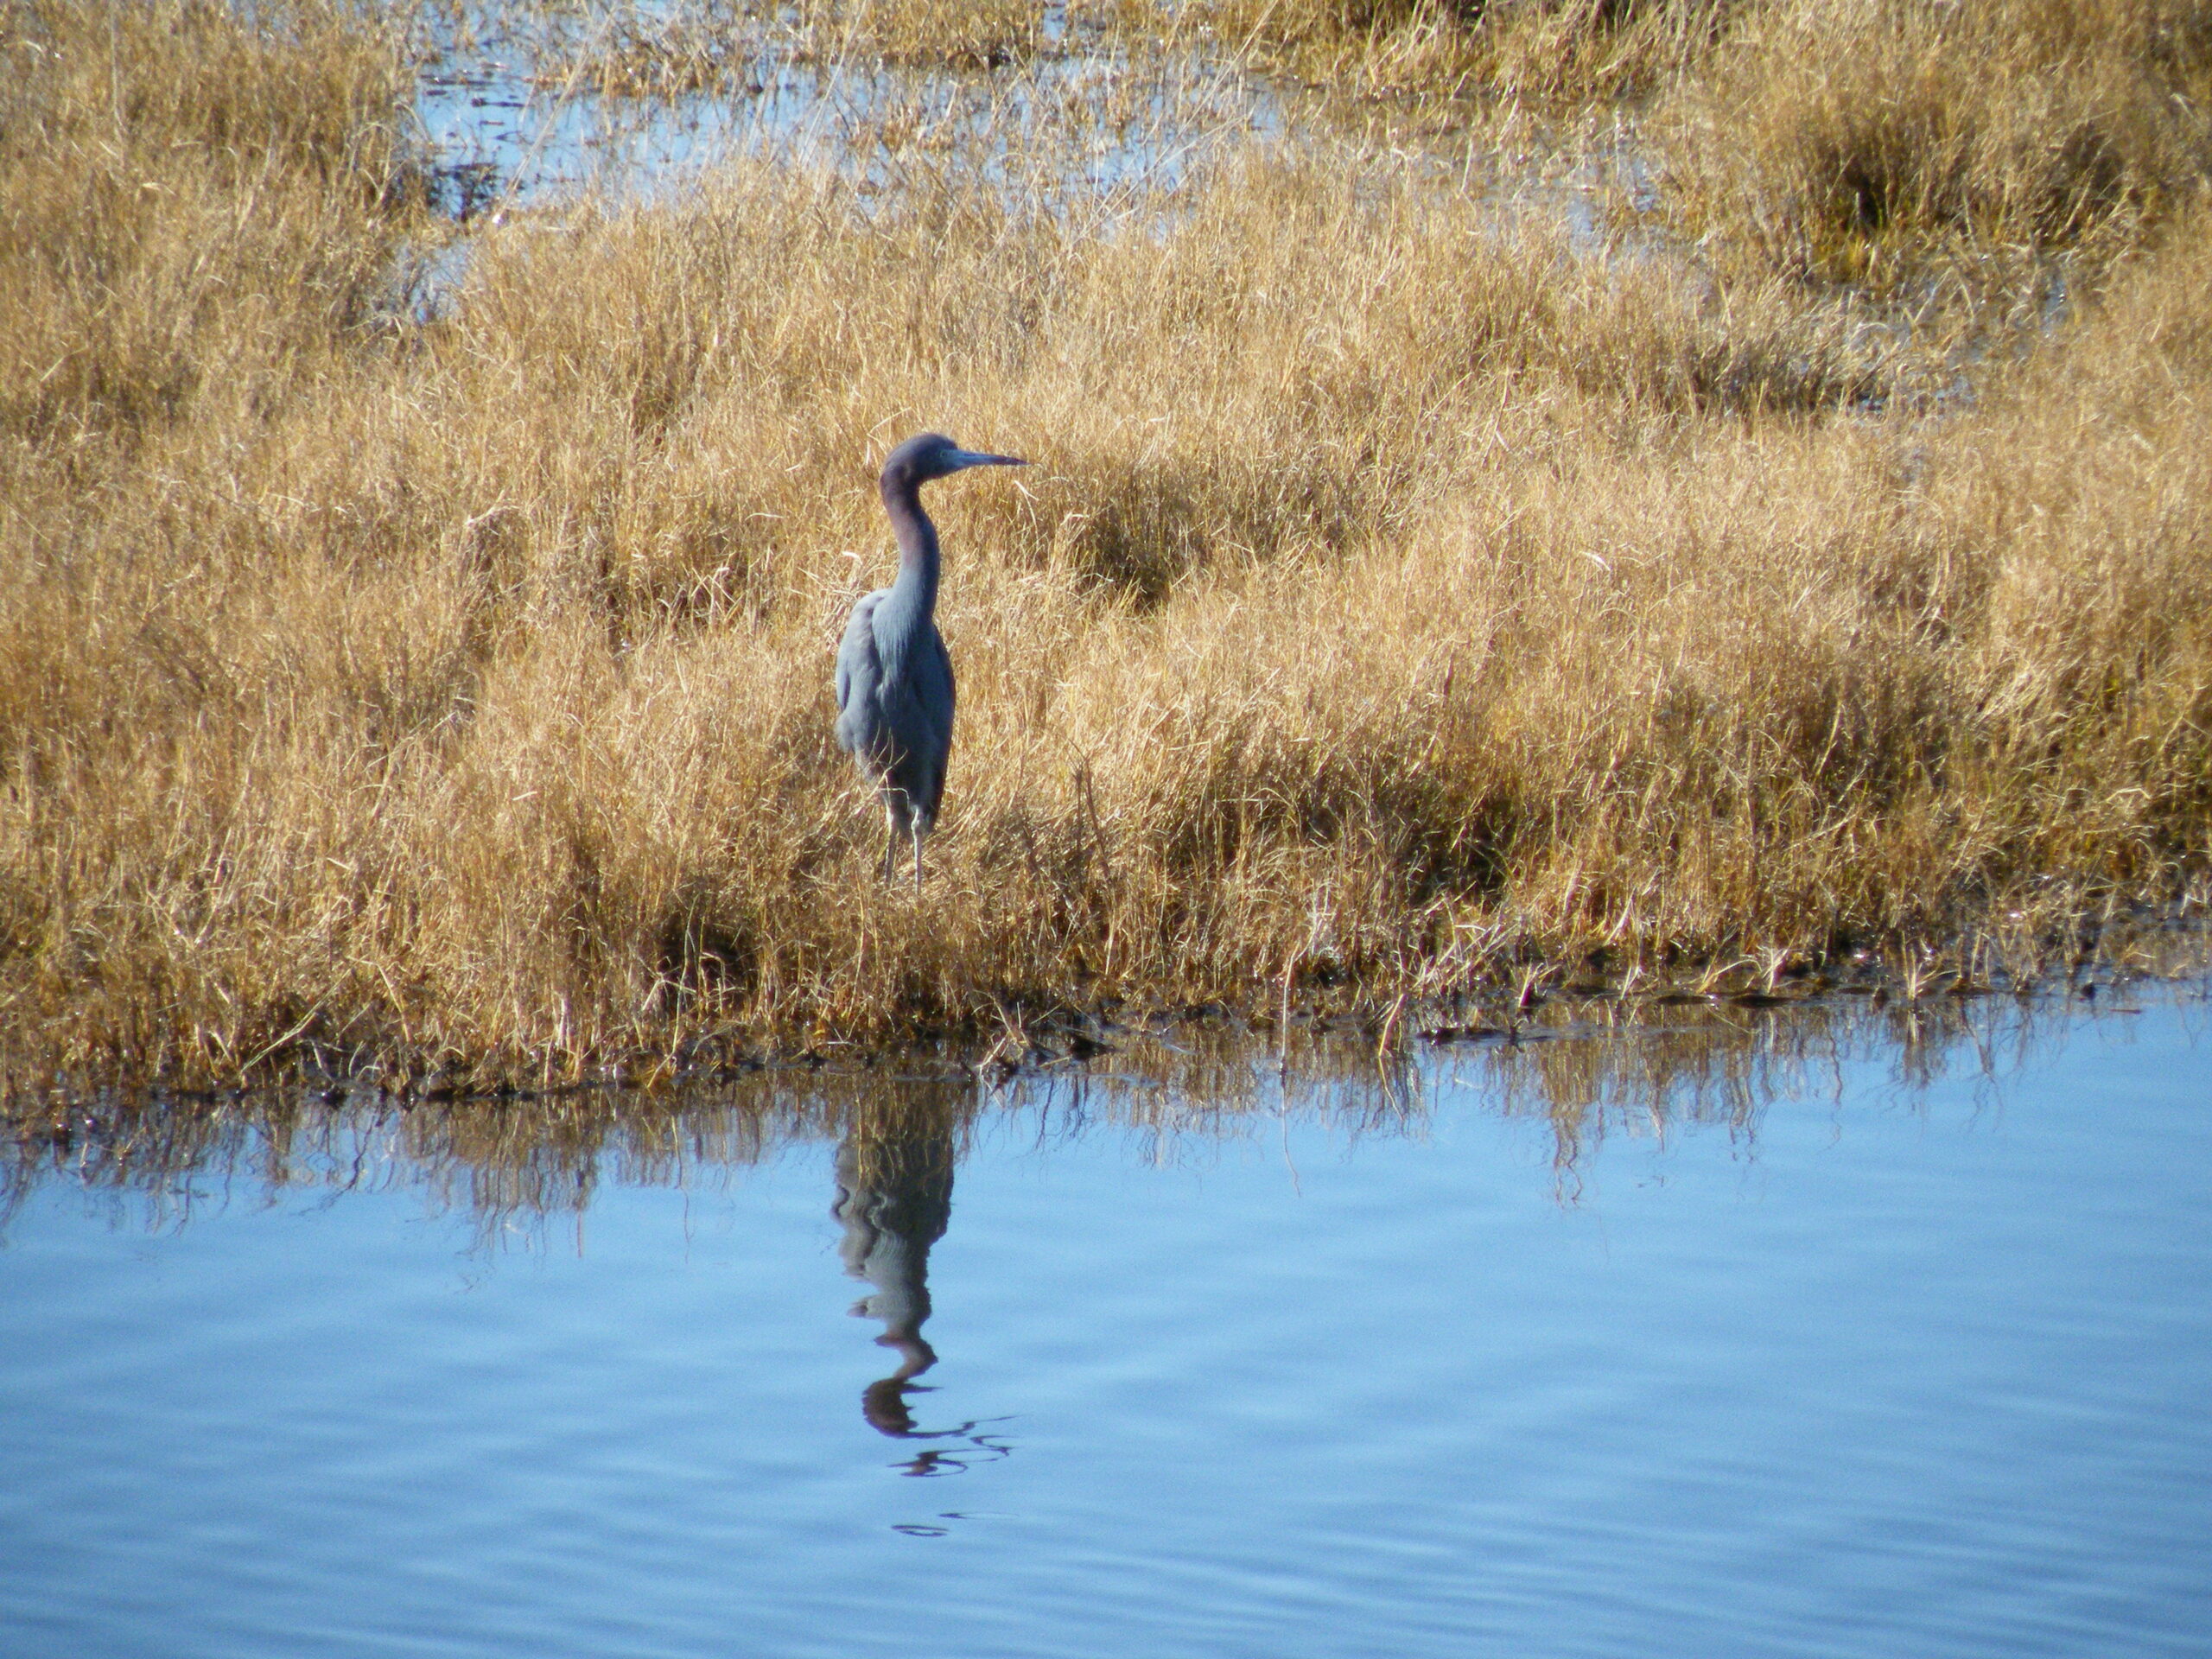 Decorative photo taken by Tallahassee Realtor. Shows a little blue heron standing in yellow grass next to the St Marks river.